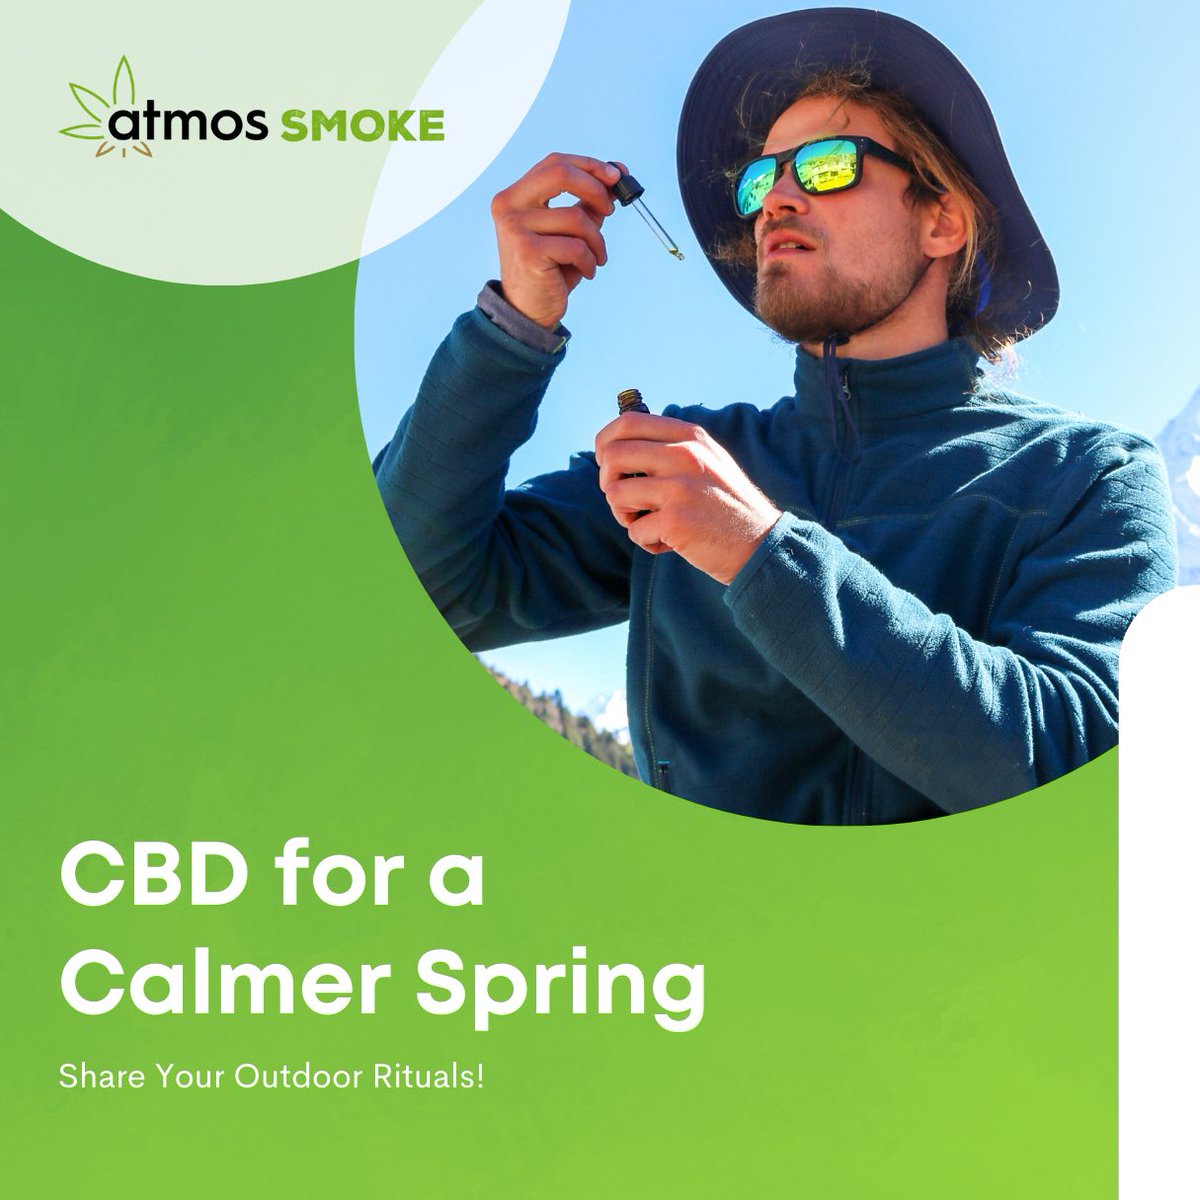 Spring vibes and feeling good, thanks to some #CBD! Share your favorite outdoor activity with Atmos CBD in the comments section below! 🌷

#AtmosCBD #Spring #Outdoors #AtmosSmoke